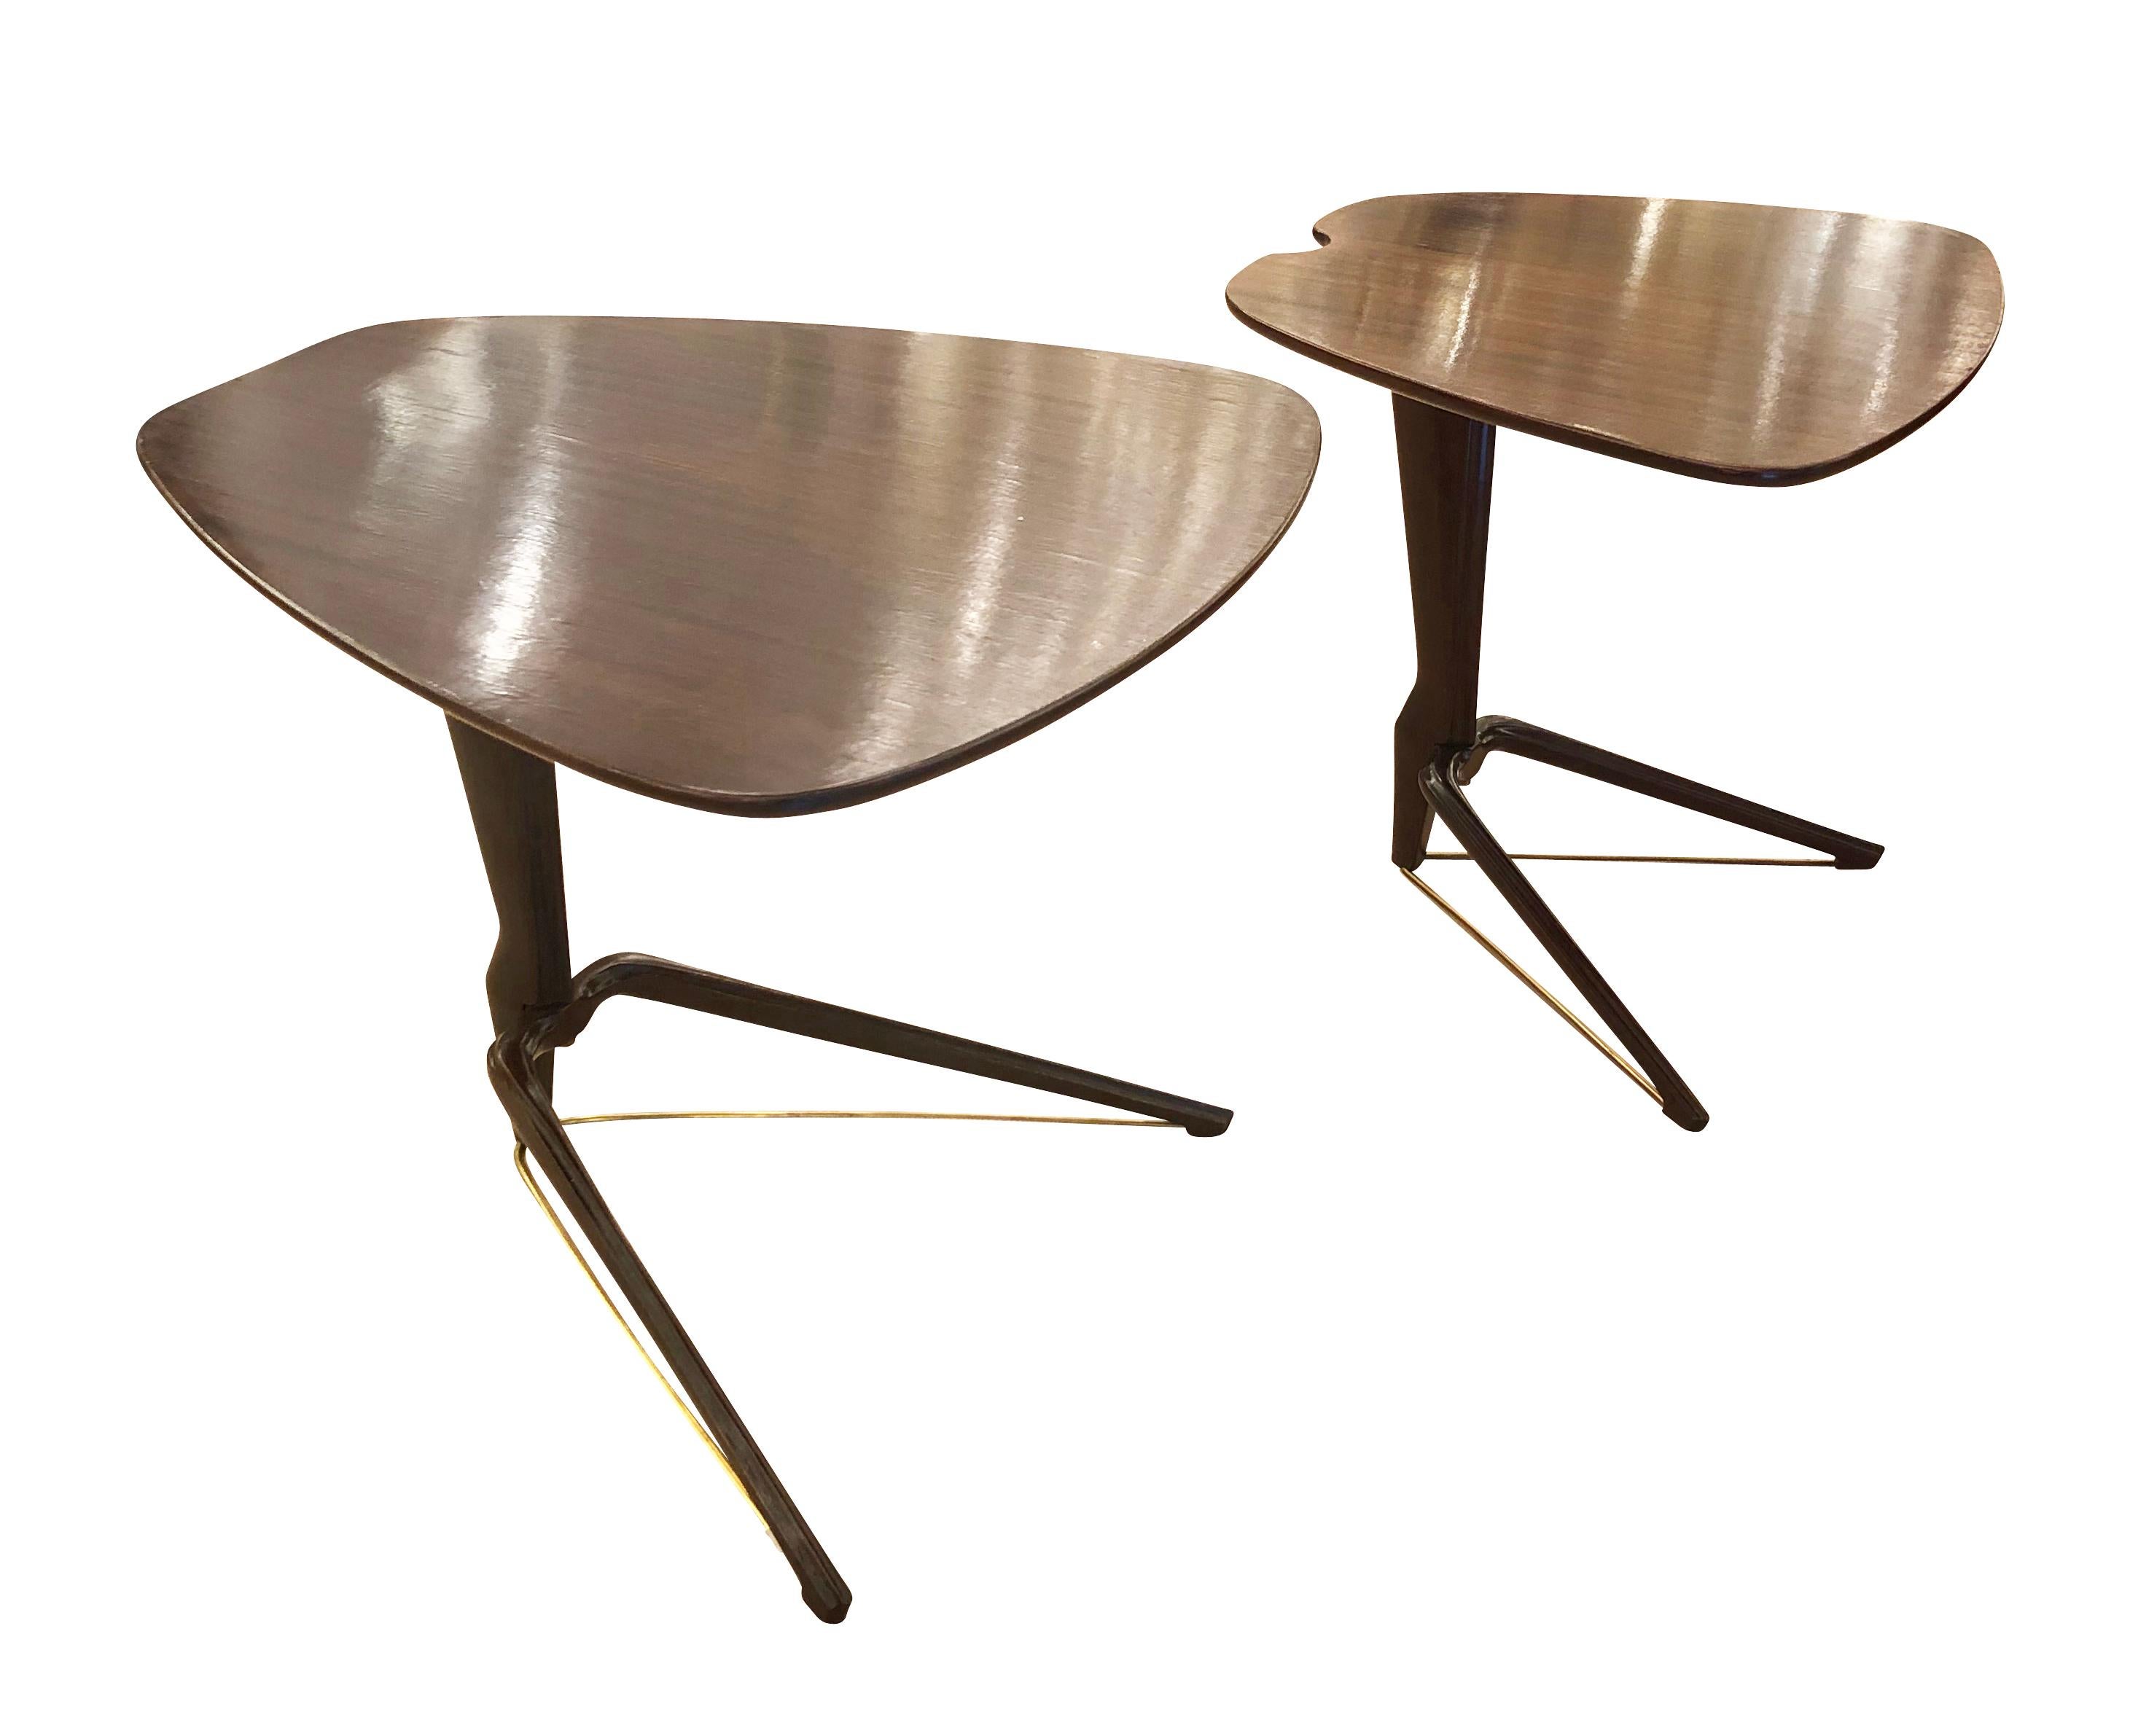 Italian Mid-Century nesting tables made in wood with brass supports. Beautifully designed and contoured tops and legs.

Condition: Excellent vintage condition, minor wear consistent with age and use.

Width: 20” 

Depth: 23.5” minimum when